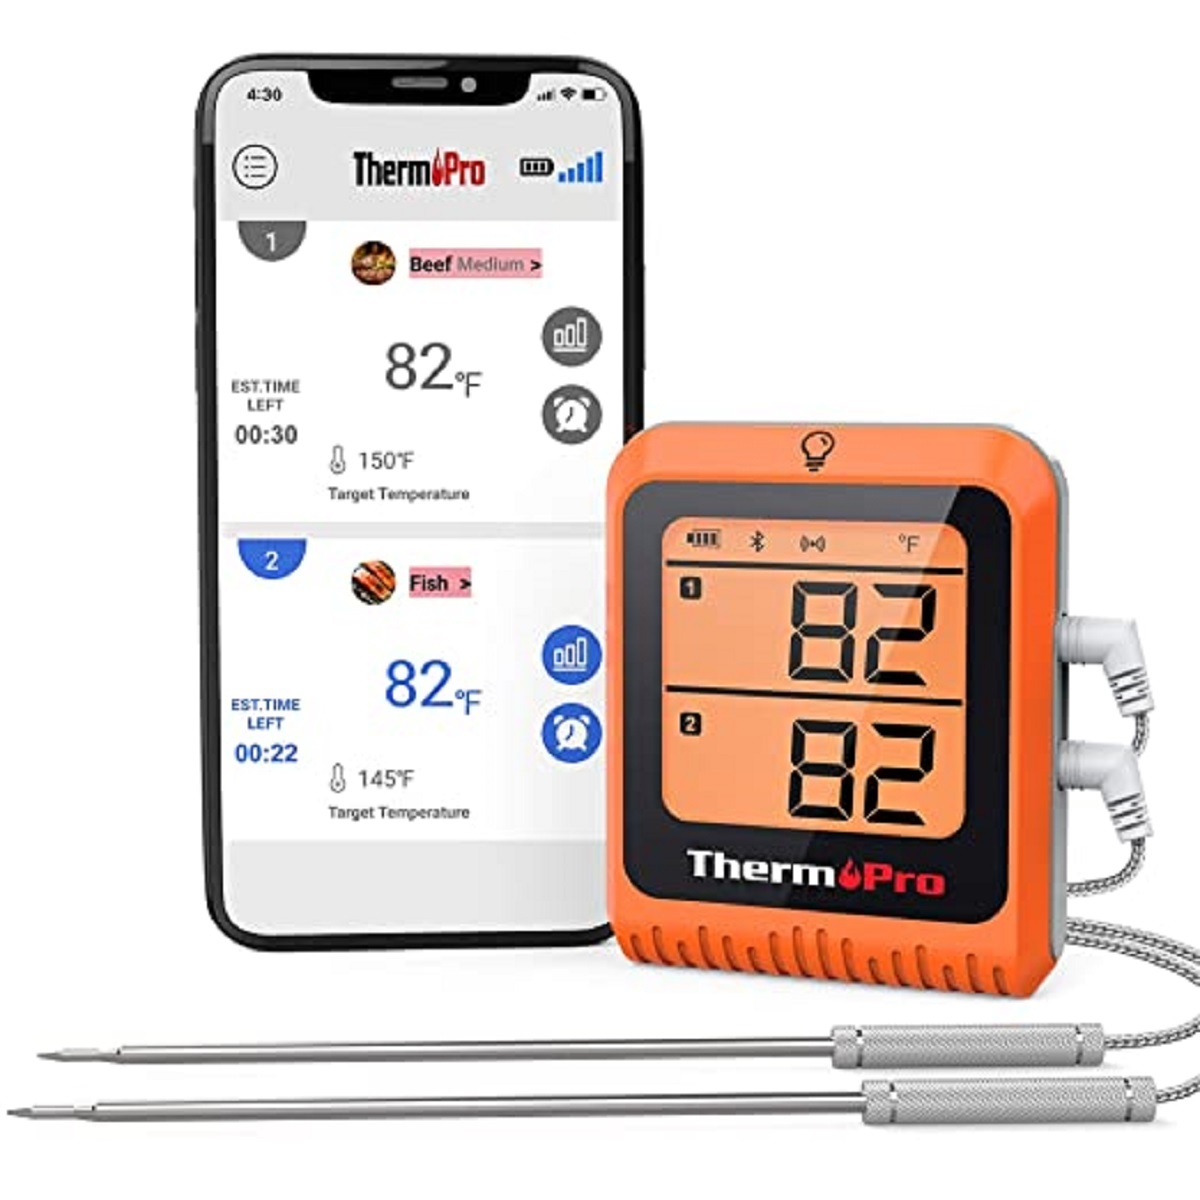 https://cdn.shoplightspeed.com/shops/659041/files/56064395/thermo-pro-therm-pro-bluetooth-cooking-thermometer.jpg